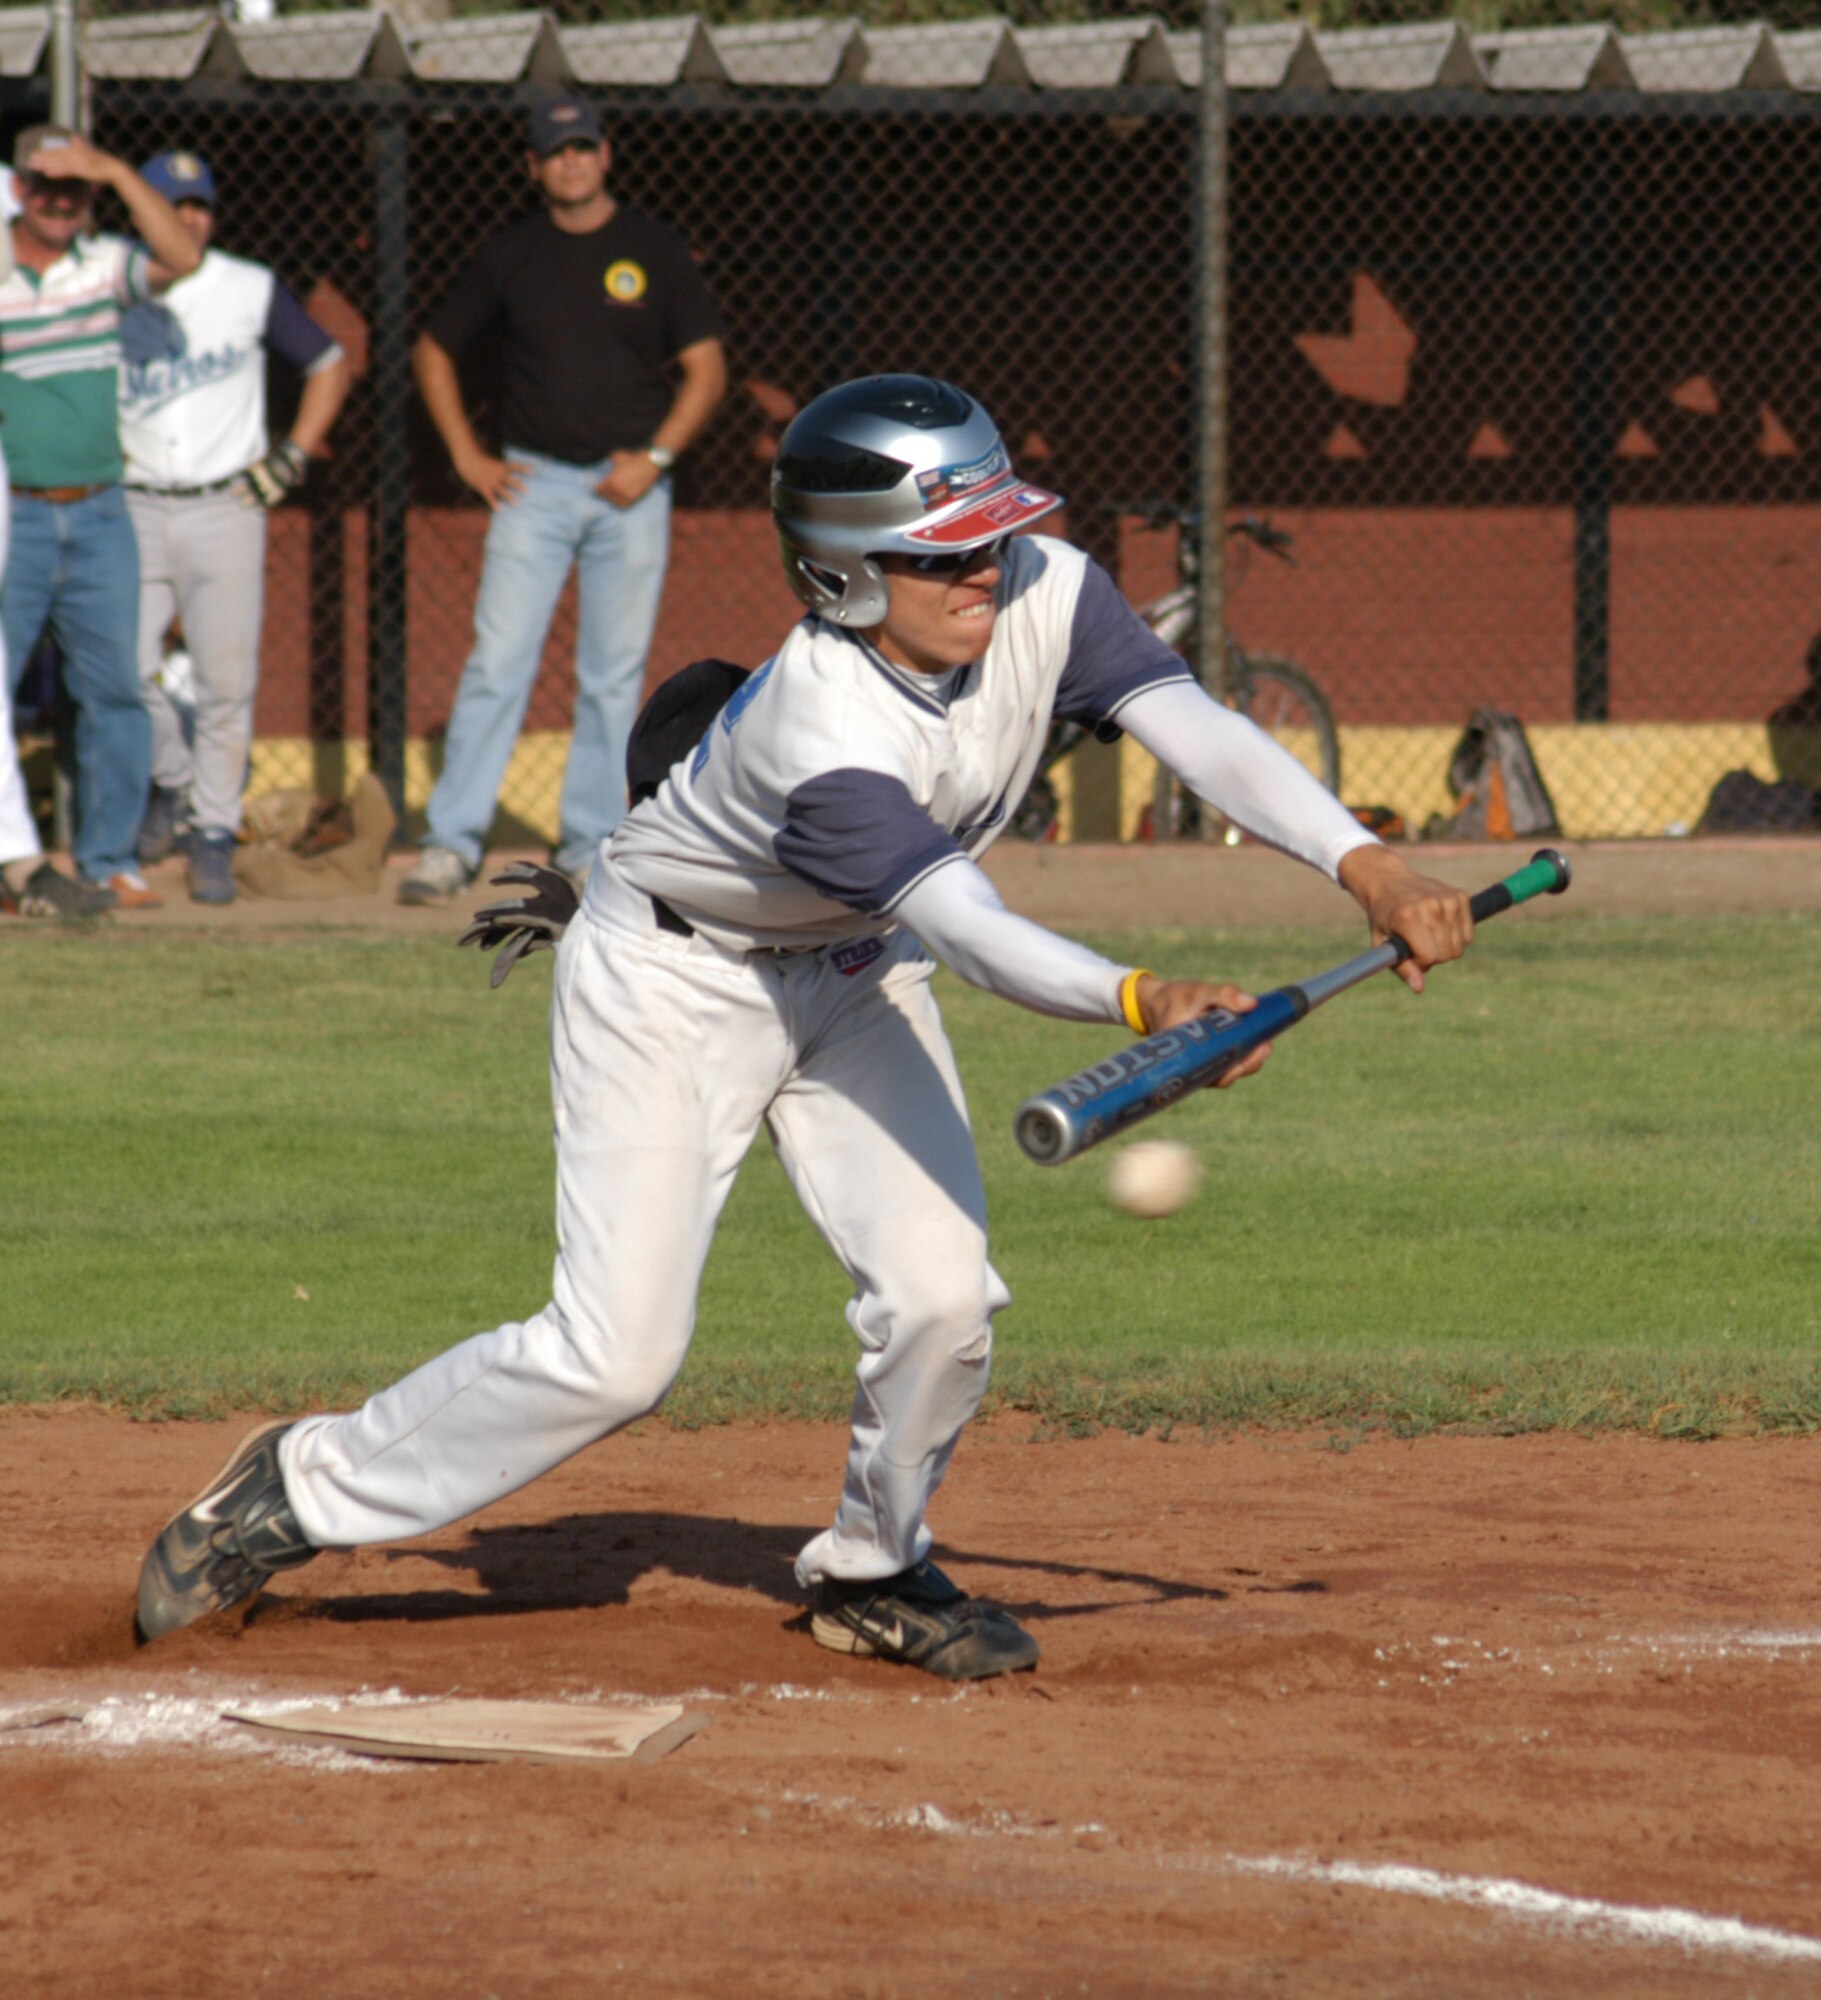 A player for the Santiago Metros semi-pro baseball team gets ready to bunt and take off for first base during a game played against U.S. Airmen visiting Chile. The Airmen were in town for FIDAE 2008, one of the largest air and trade shows as well as Exercise Newen 2008, participating with the Chilean Air Force. Airmen from Davis-Monthan Air Force Base, Ariz., and 12th Air Force (Air Forces Southern) brought gifts of tee shirts, backpacks and hats, donated by the Colorado Rockies professional baseball team, to the Santiago players as well as the local children. (U.S. Air Force photo/Master Sgt. Jason Tudor).